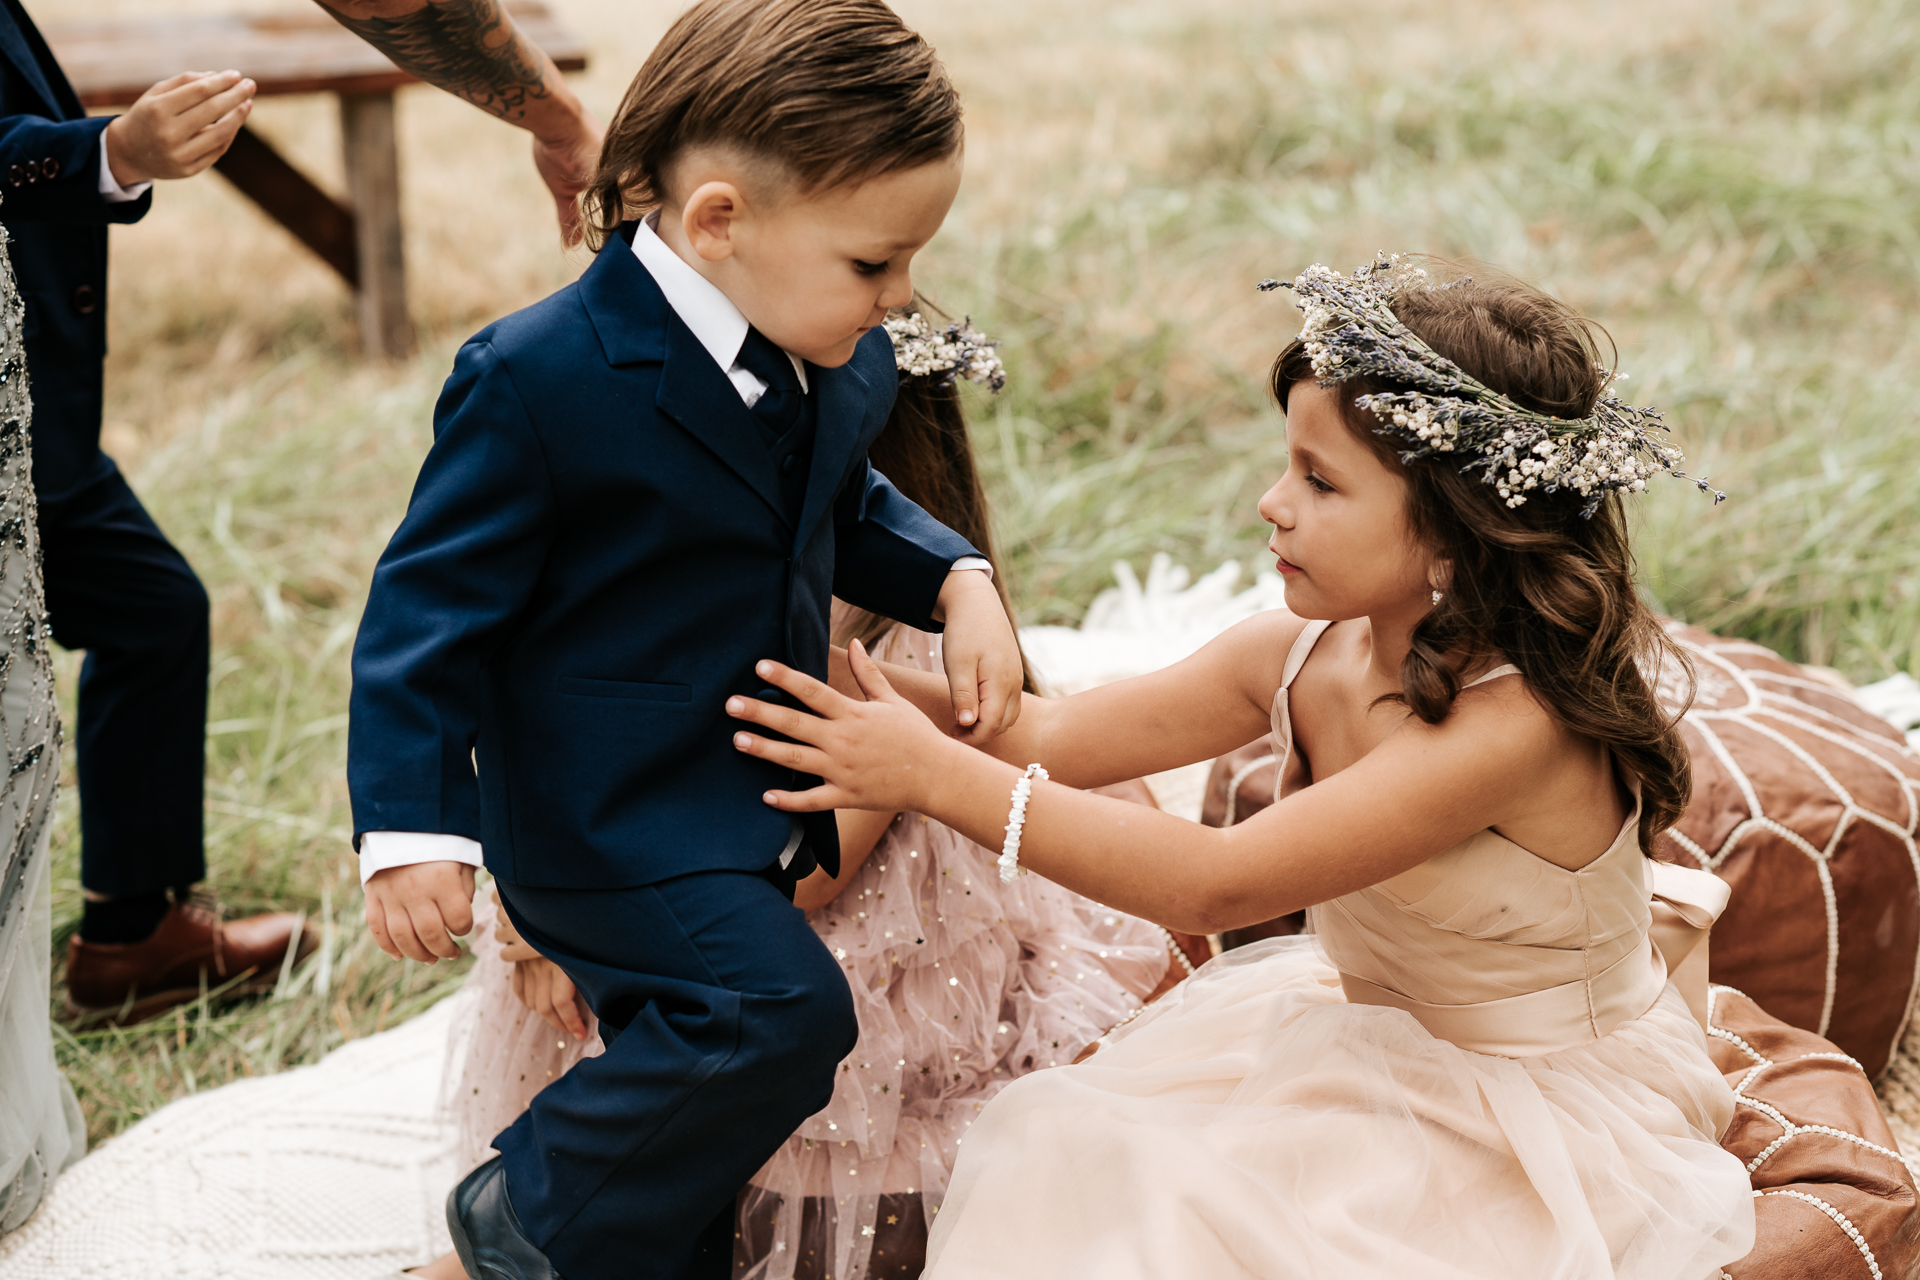 Ring Bearer gets handed off to the flower girl during the ceremony and sits on a pouf